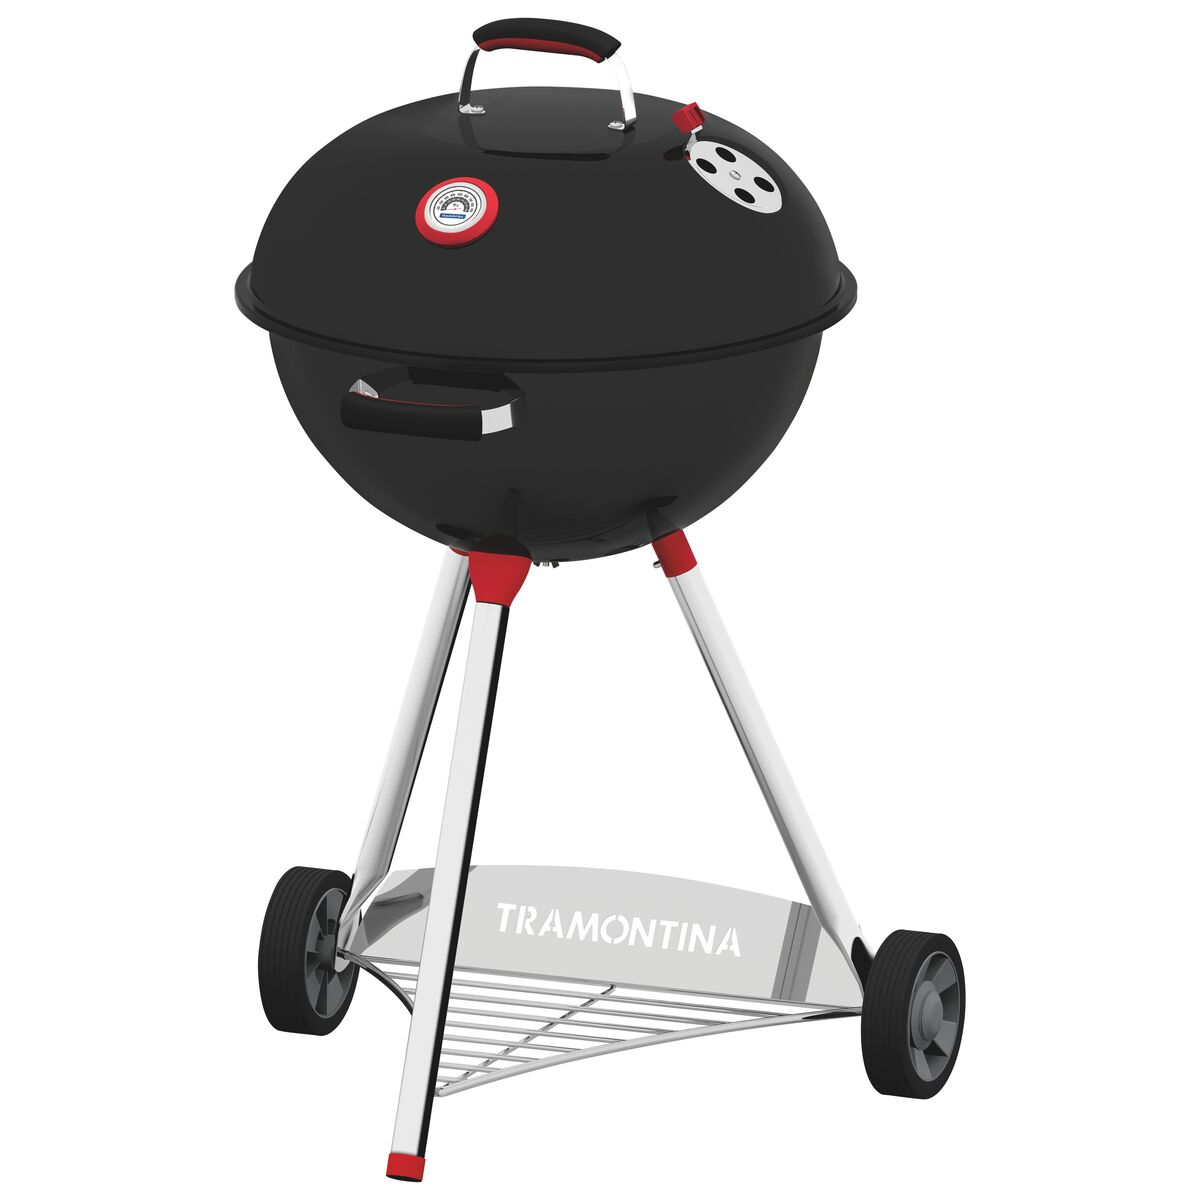 Tramontina Enameled-Steel Charcoal with Stainless-Steel Grate Grill TCP-560L and Utensils